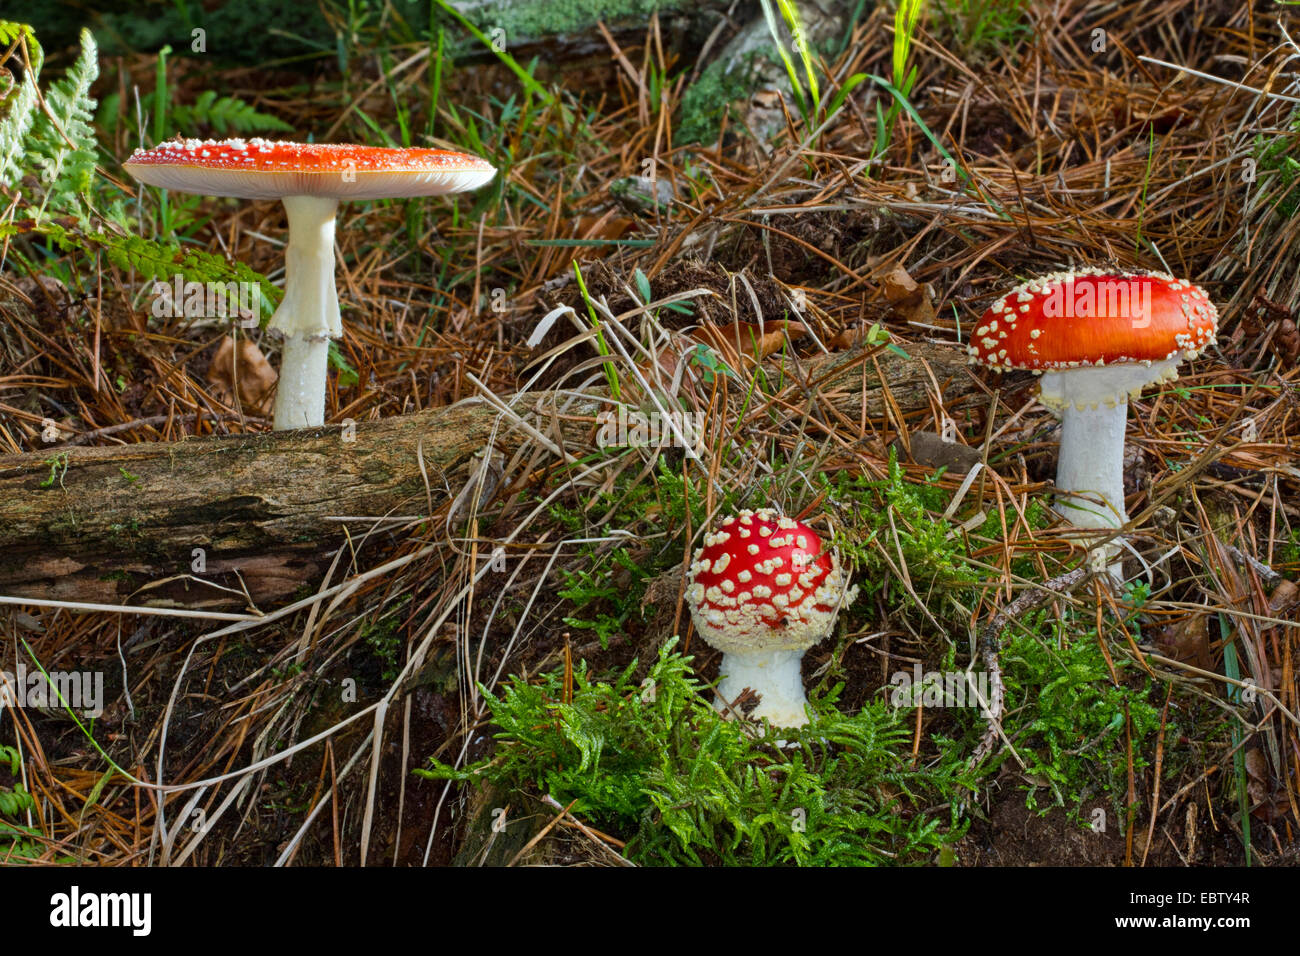 fly agaric (Amanita muscaria), three fruiting bodies in moss on forest floor, Germany, Mecklenburg-Western Pomerania Stock Photo